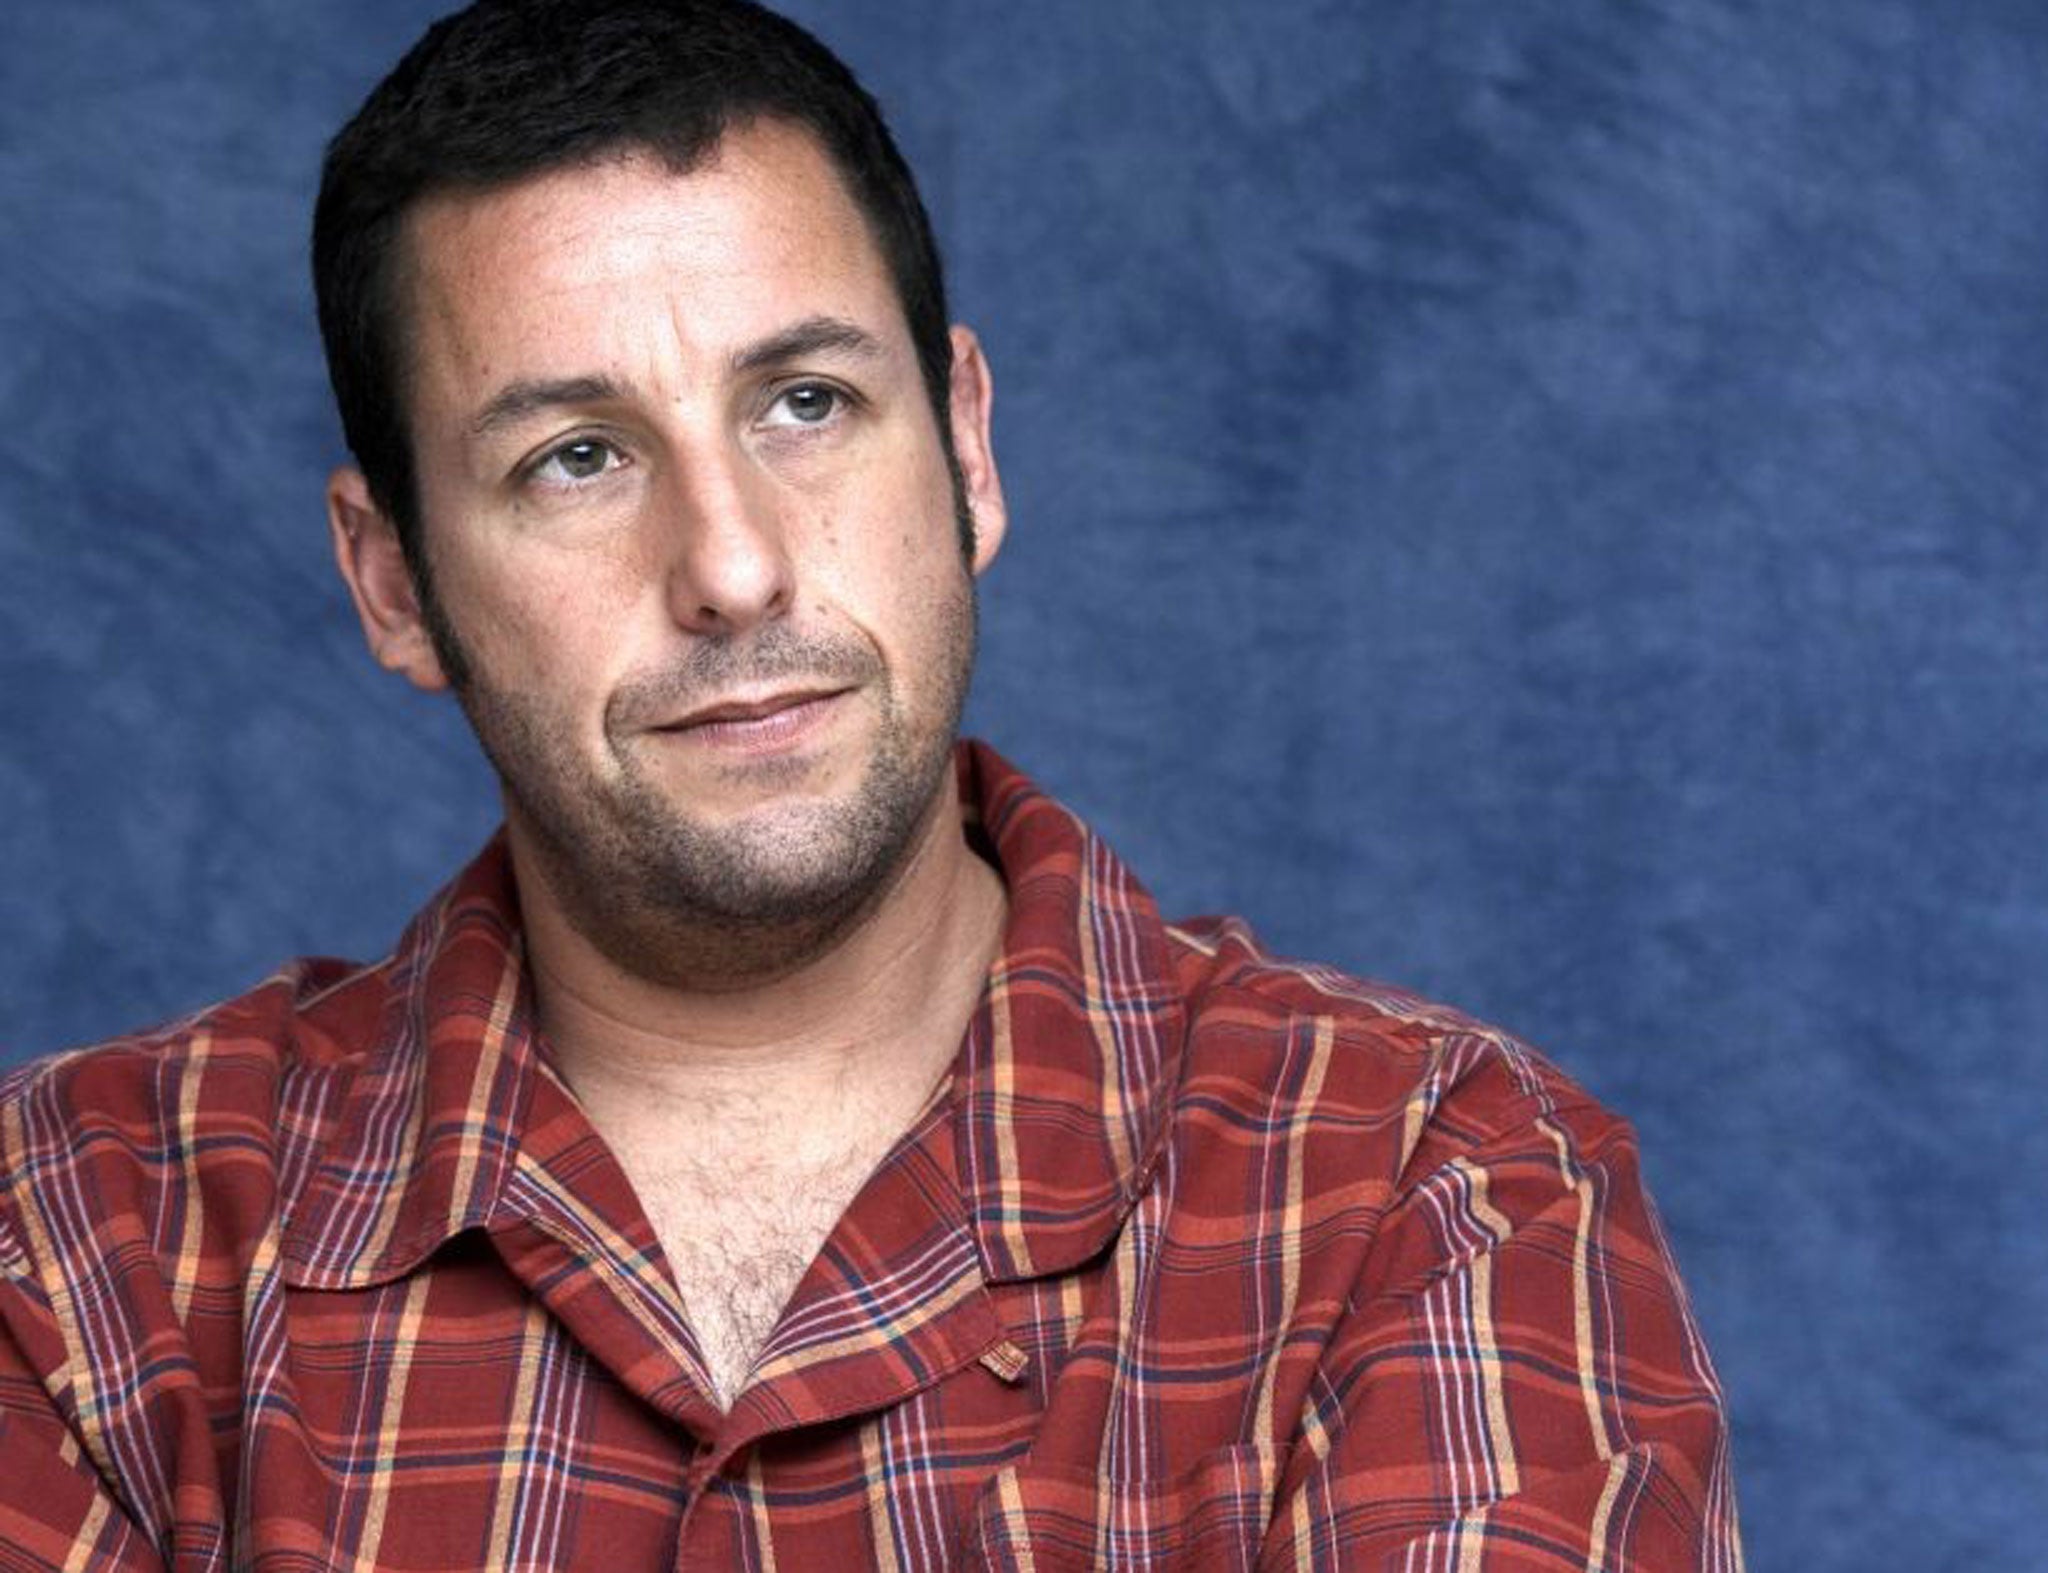 Adam Sandler is the most over-paid Hollywood actor according to Forbes, returning $3.40 for every $1 paid. 'Grown Up 2' should keep him from the top spot next year.